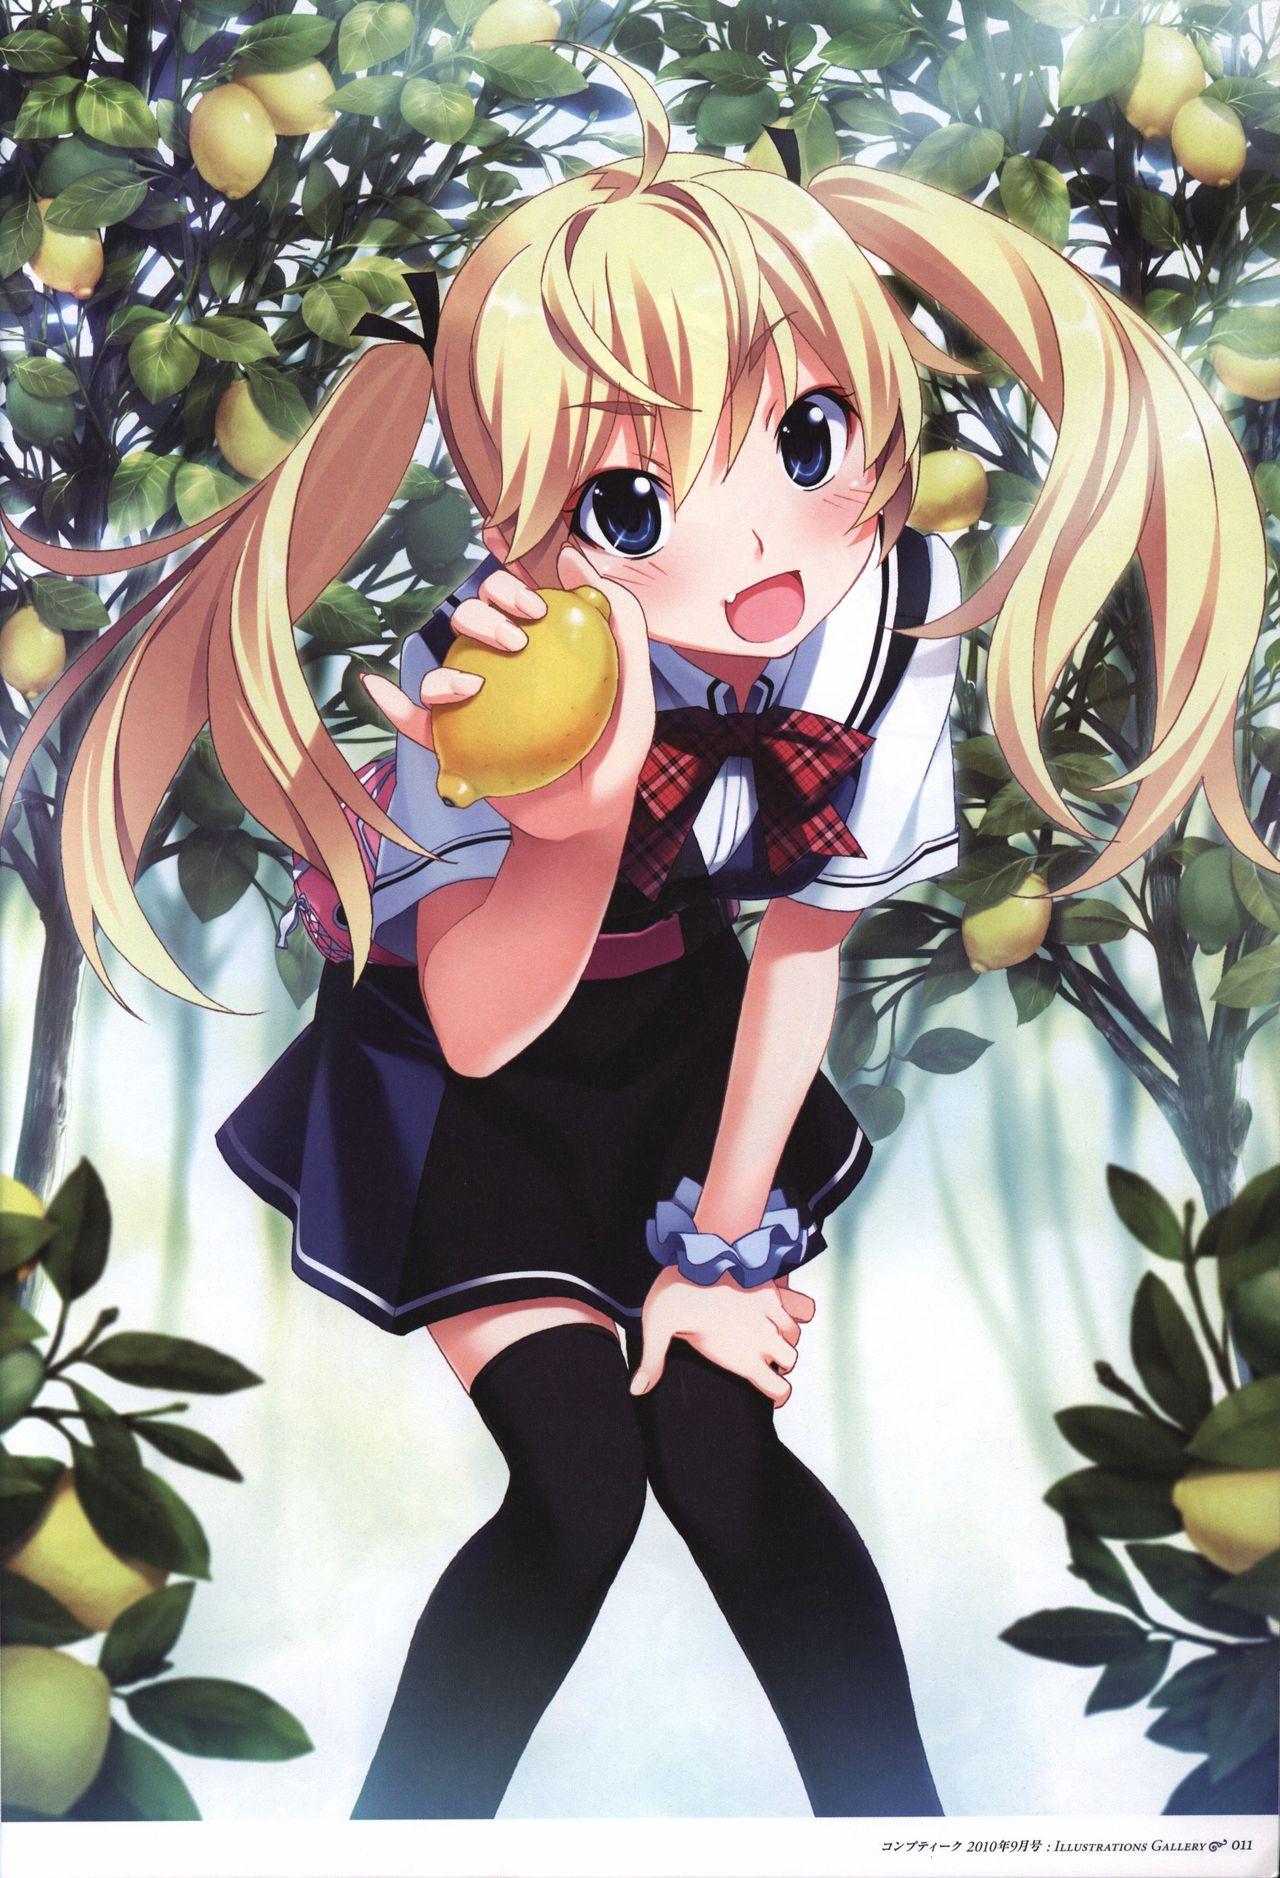 The Fruit of Grisaia Visual FanBook 11